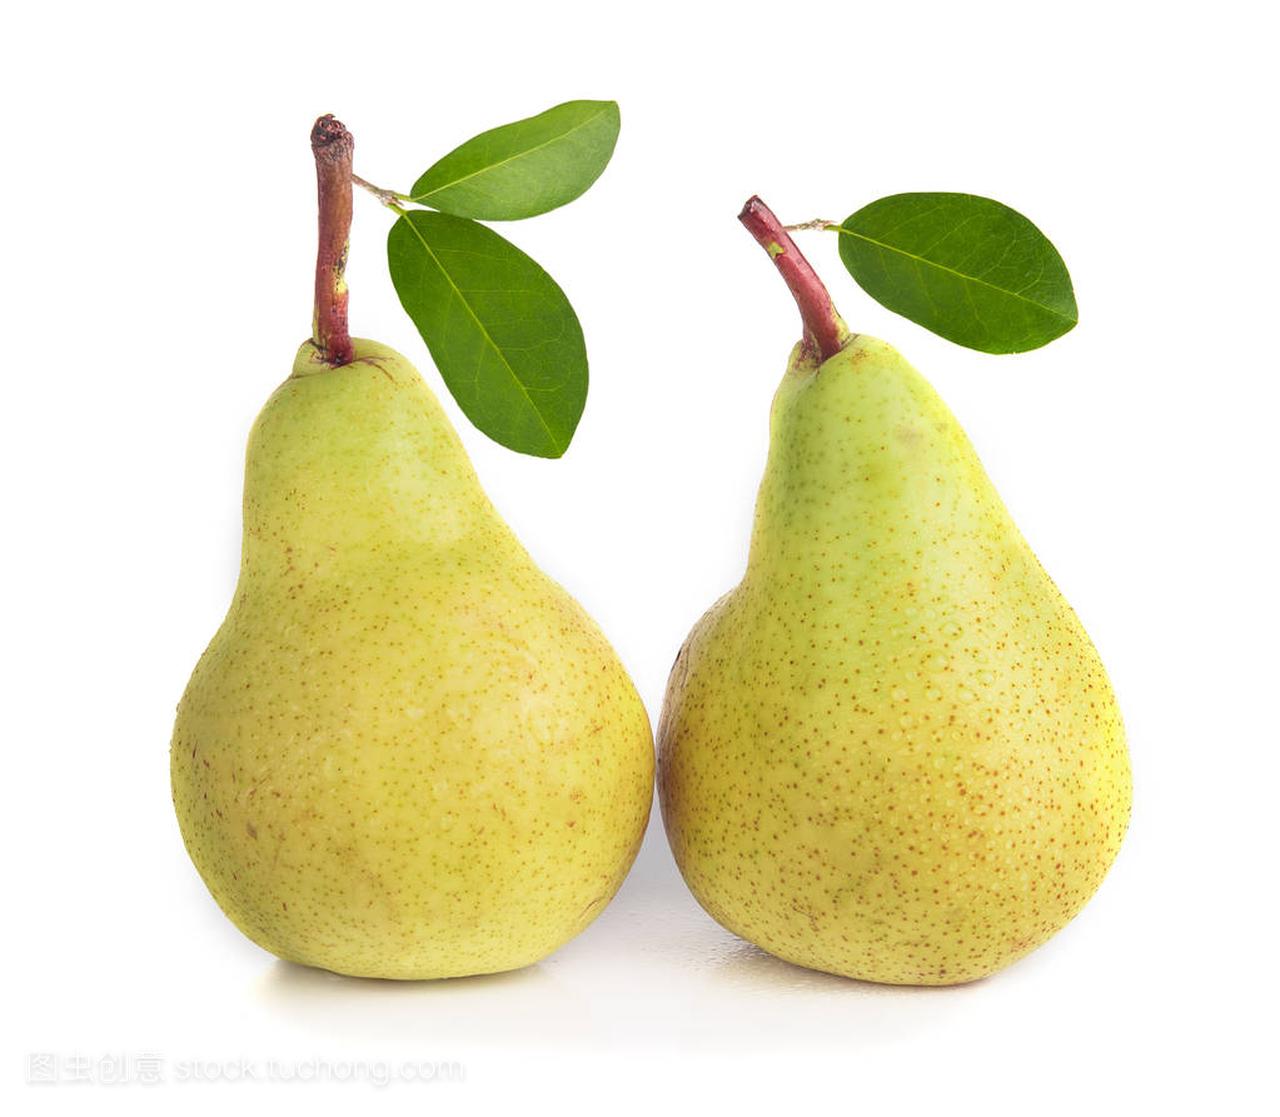 Two pears with green leaves isolated on white background.